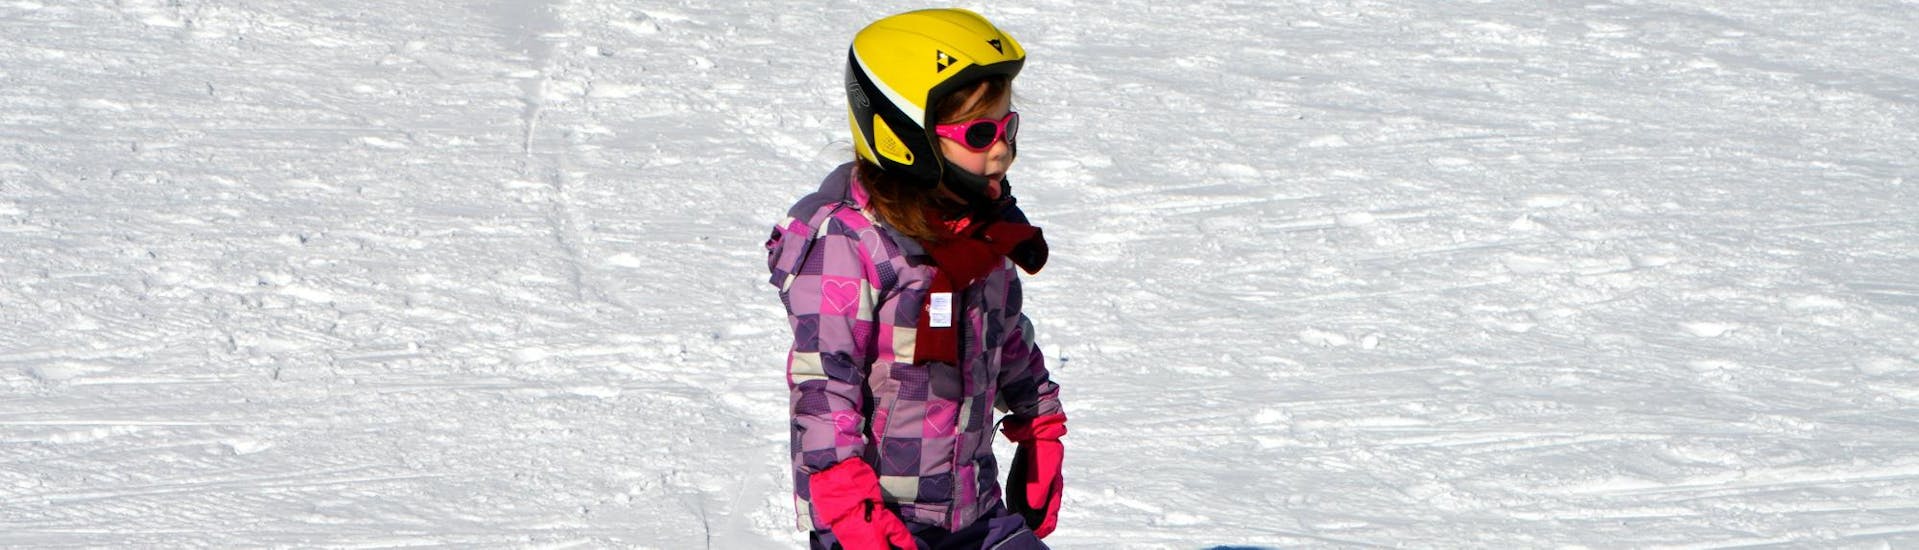 Private Ski Lessons for Kids of All Levels with Eco Ski School Andermatt - Hero image